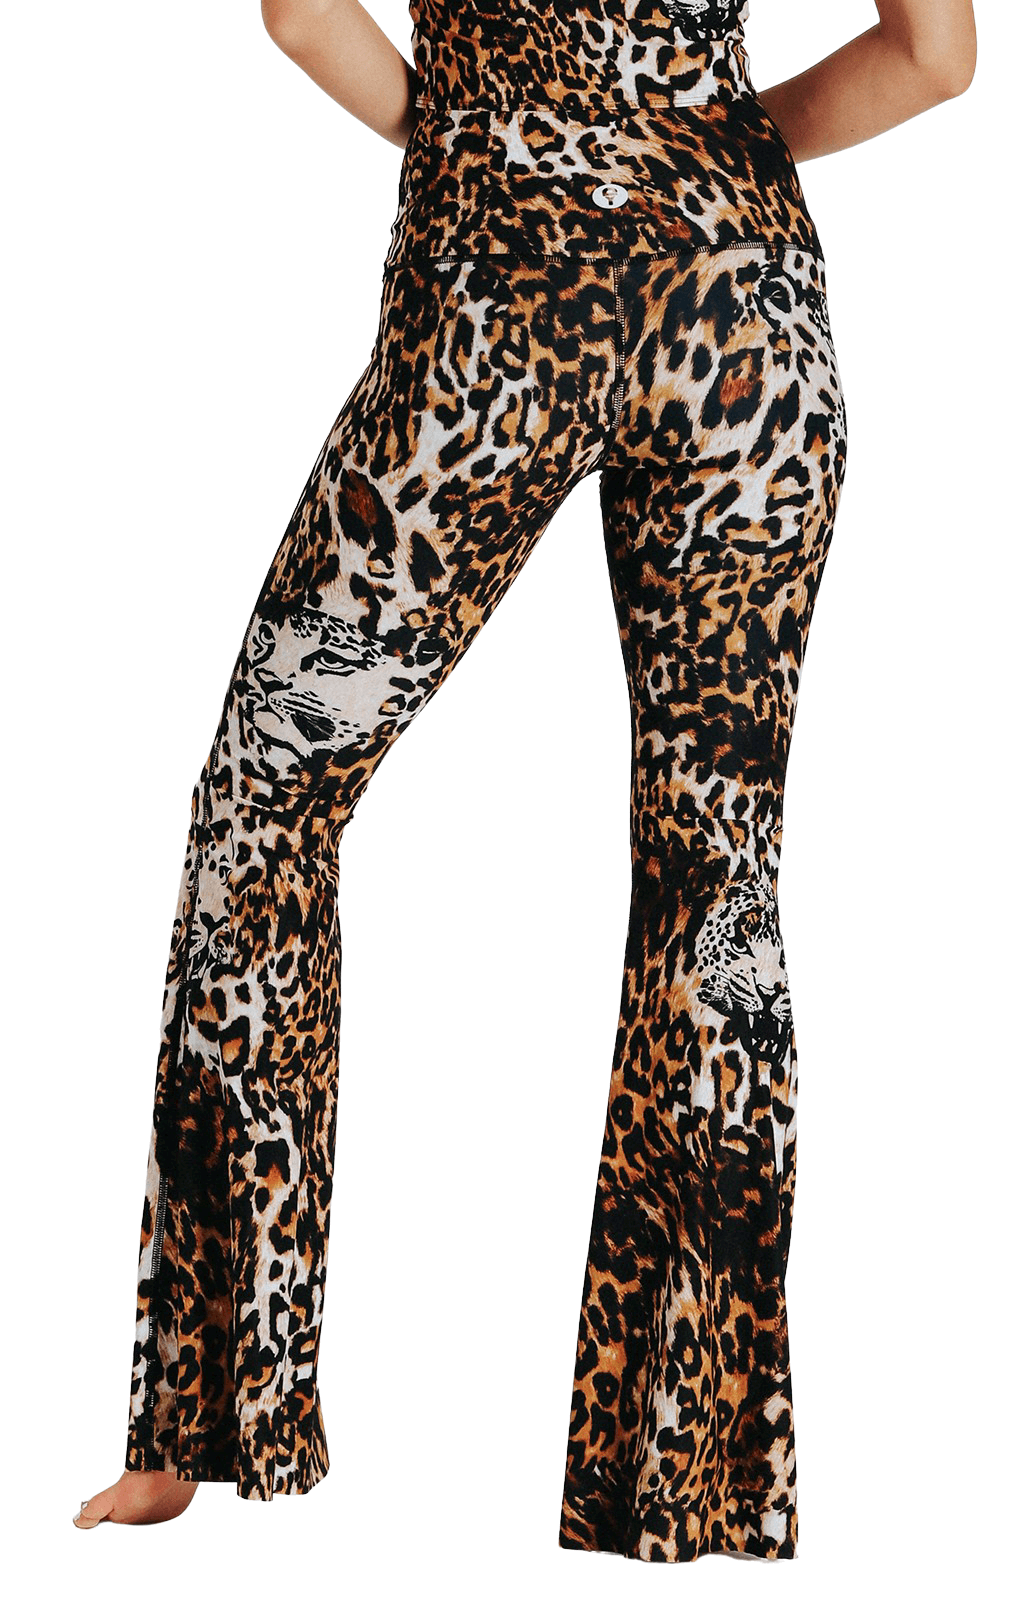 Wildcat Printed Bell Bottoms Back